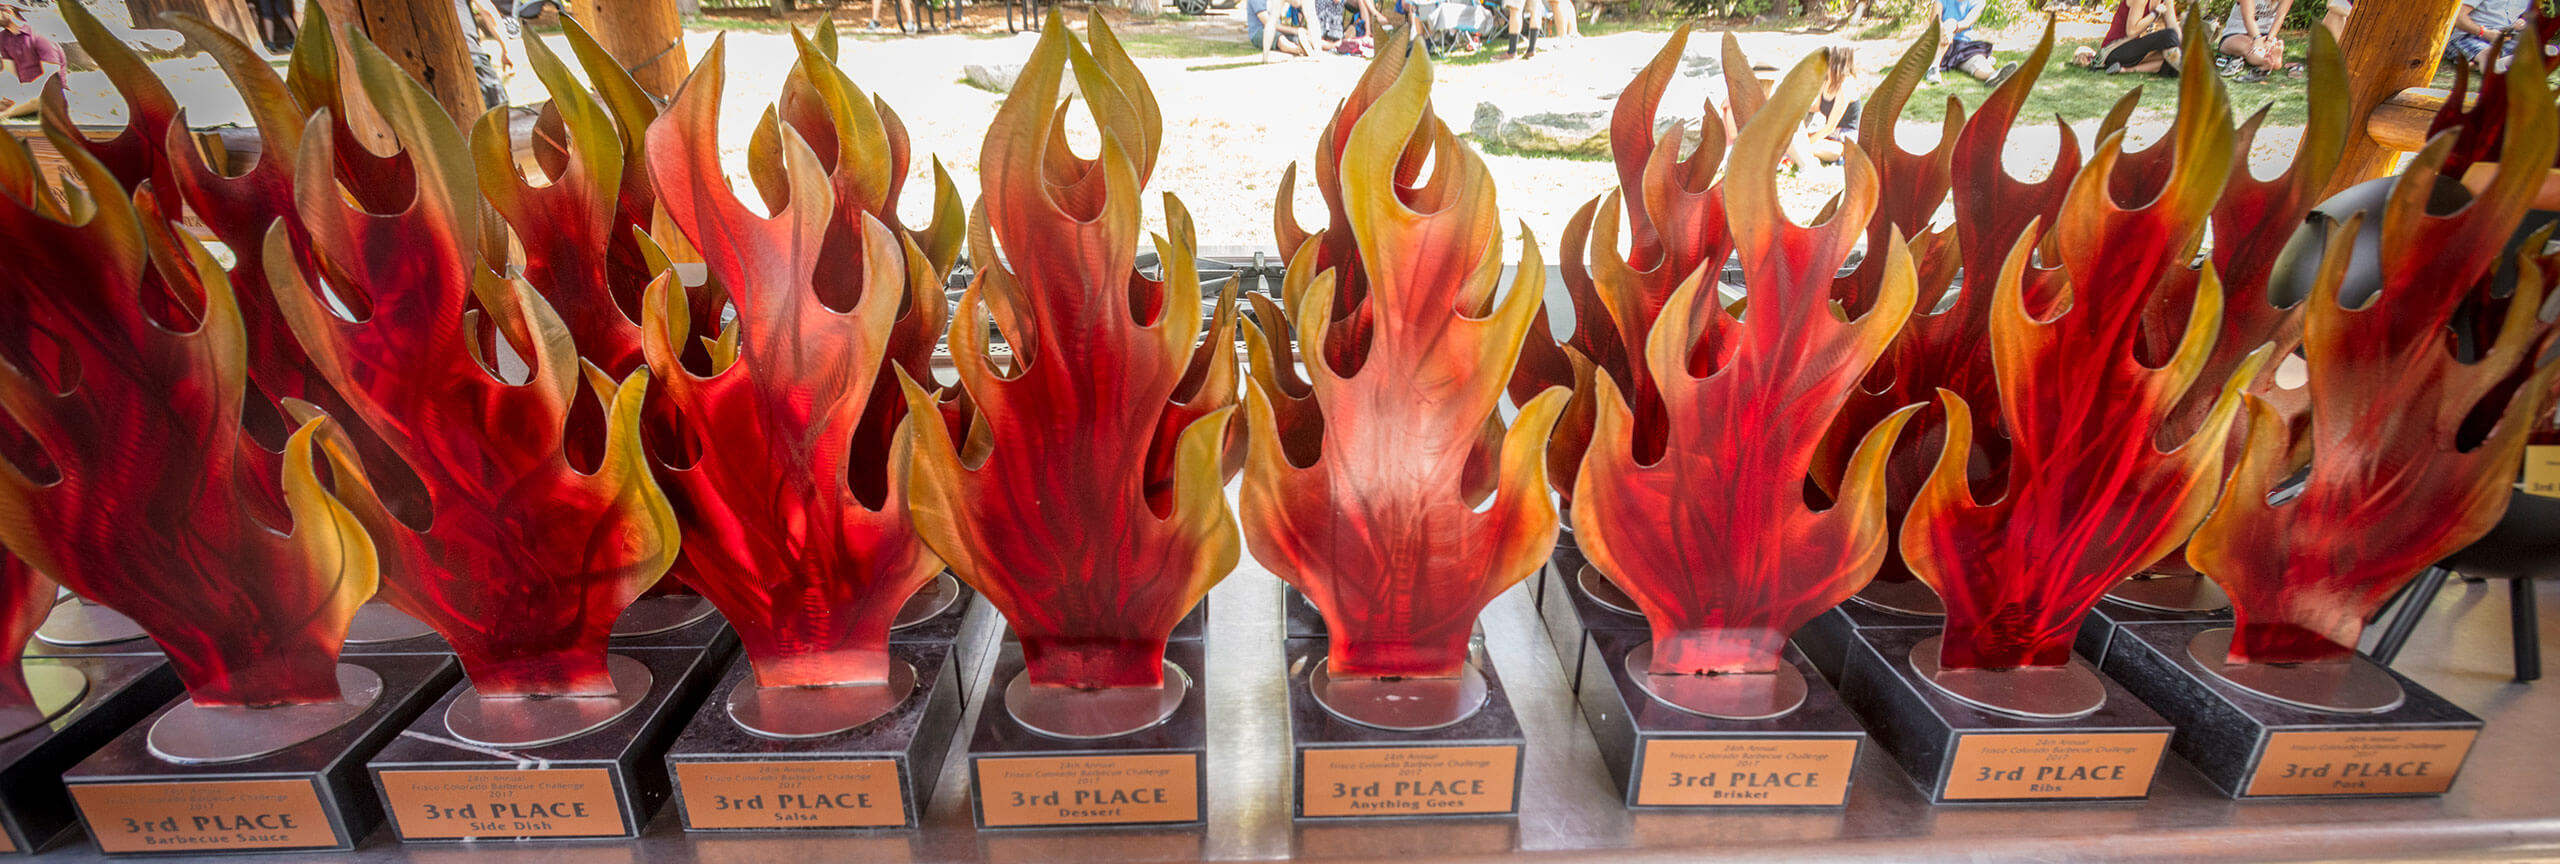 Rows of 3rd place flame-shaped trophies.